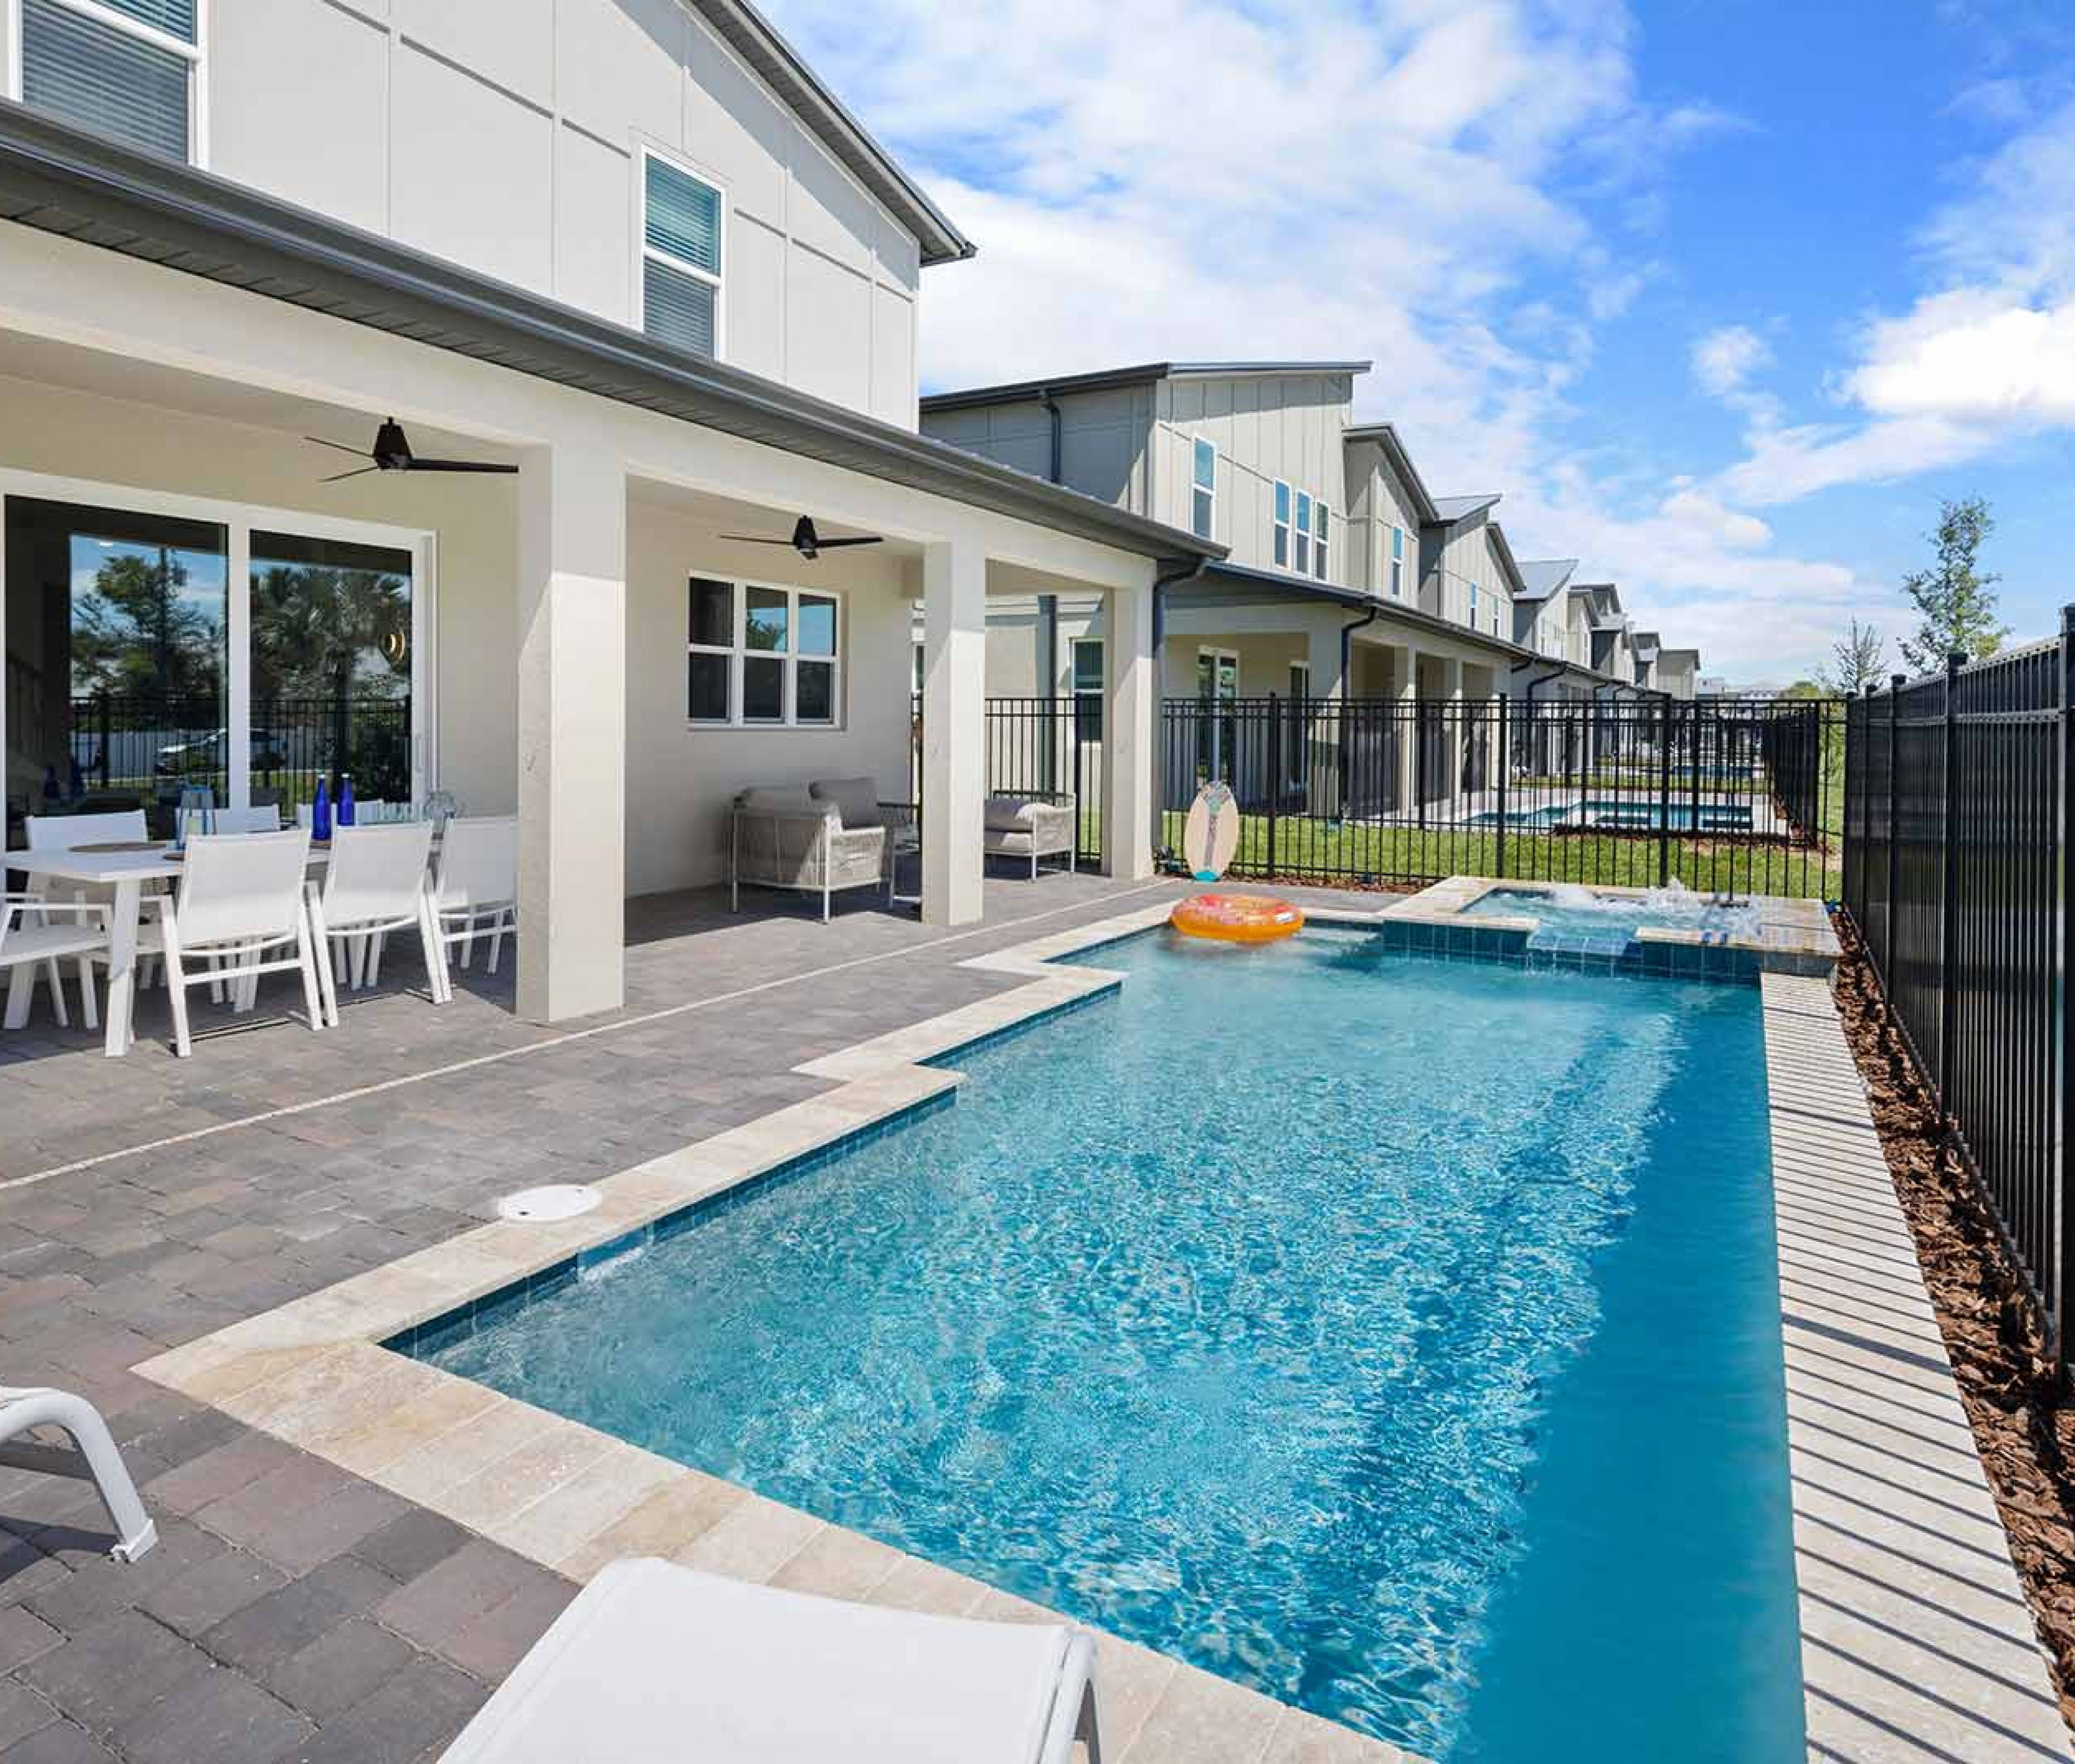 Harbor Island 30 - Melbourne Beach vacation rentals with private pools